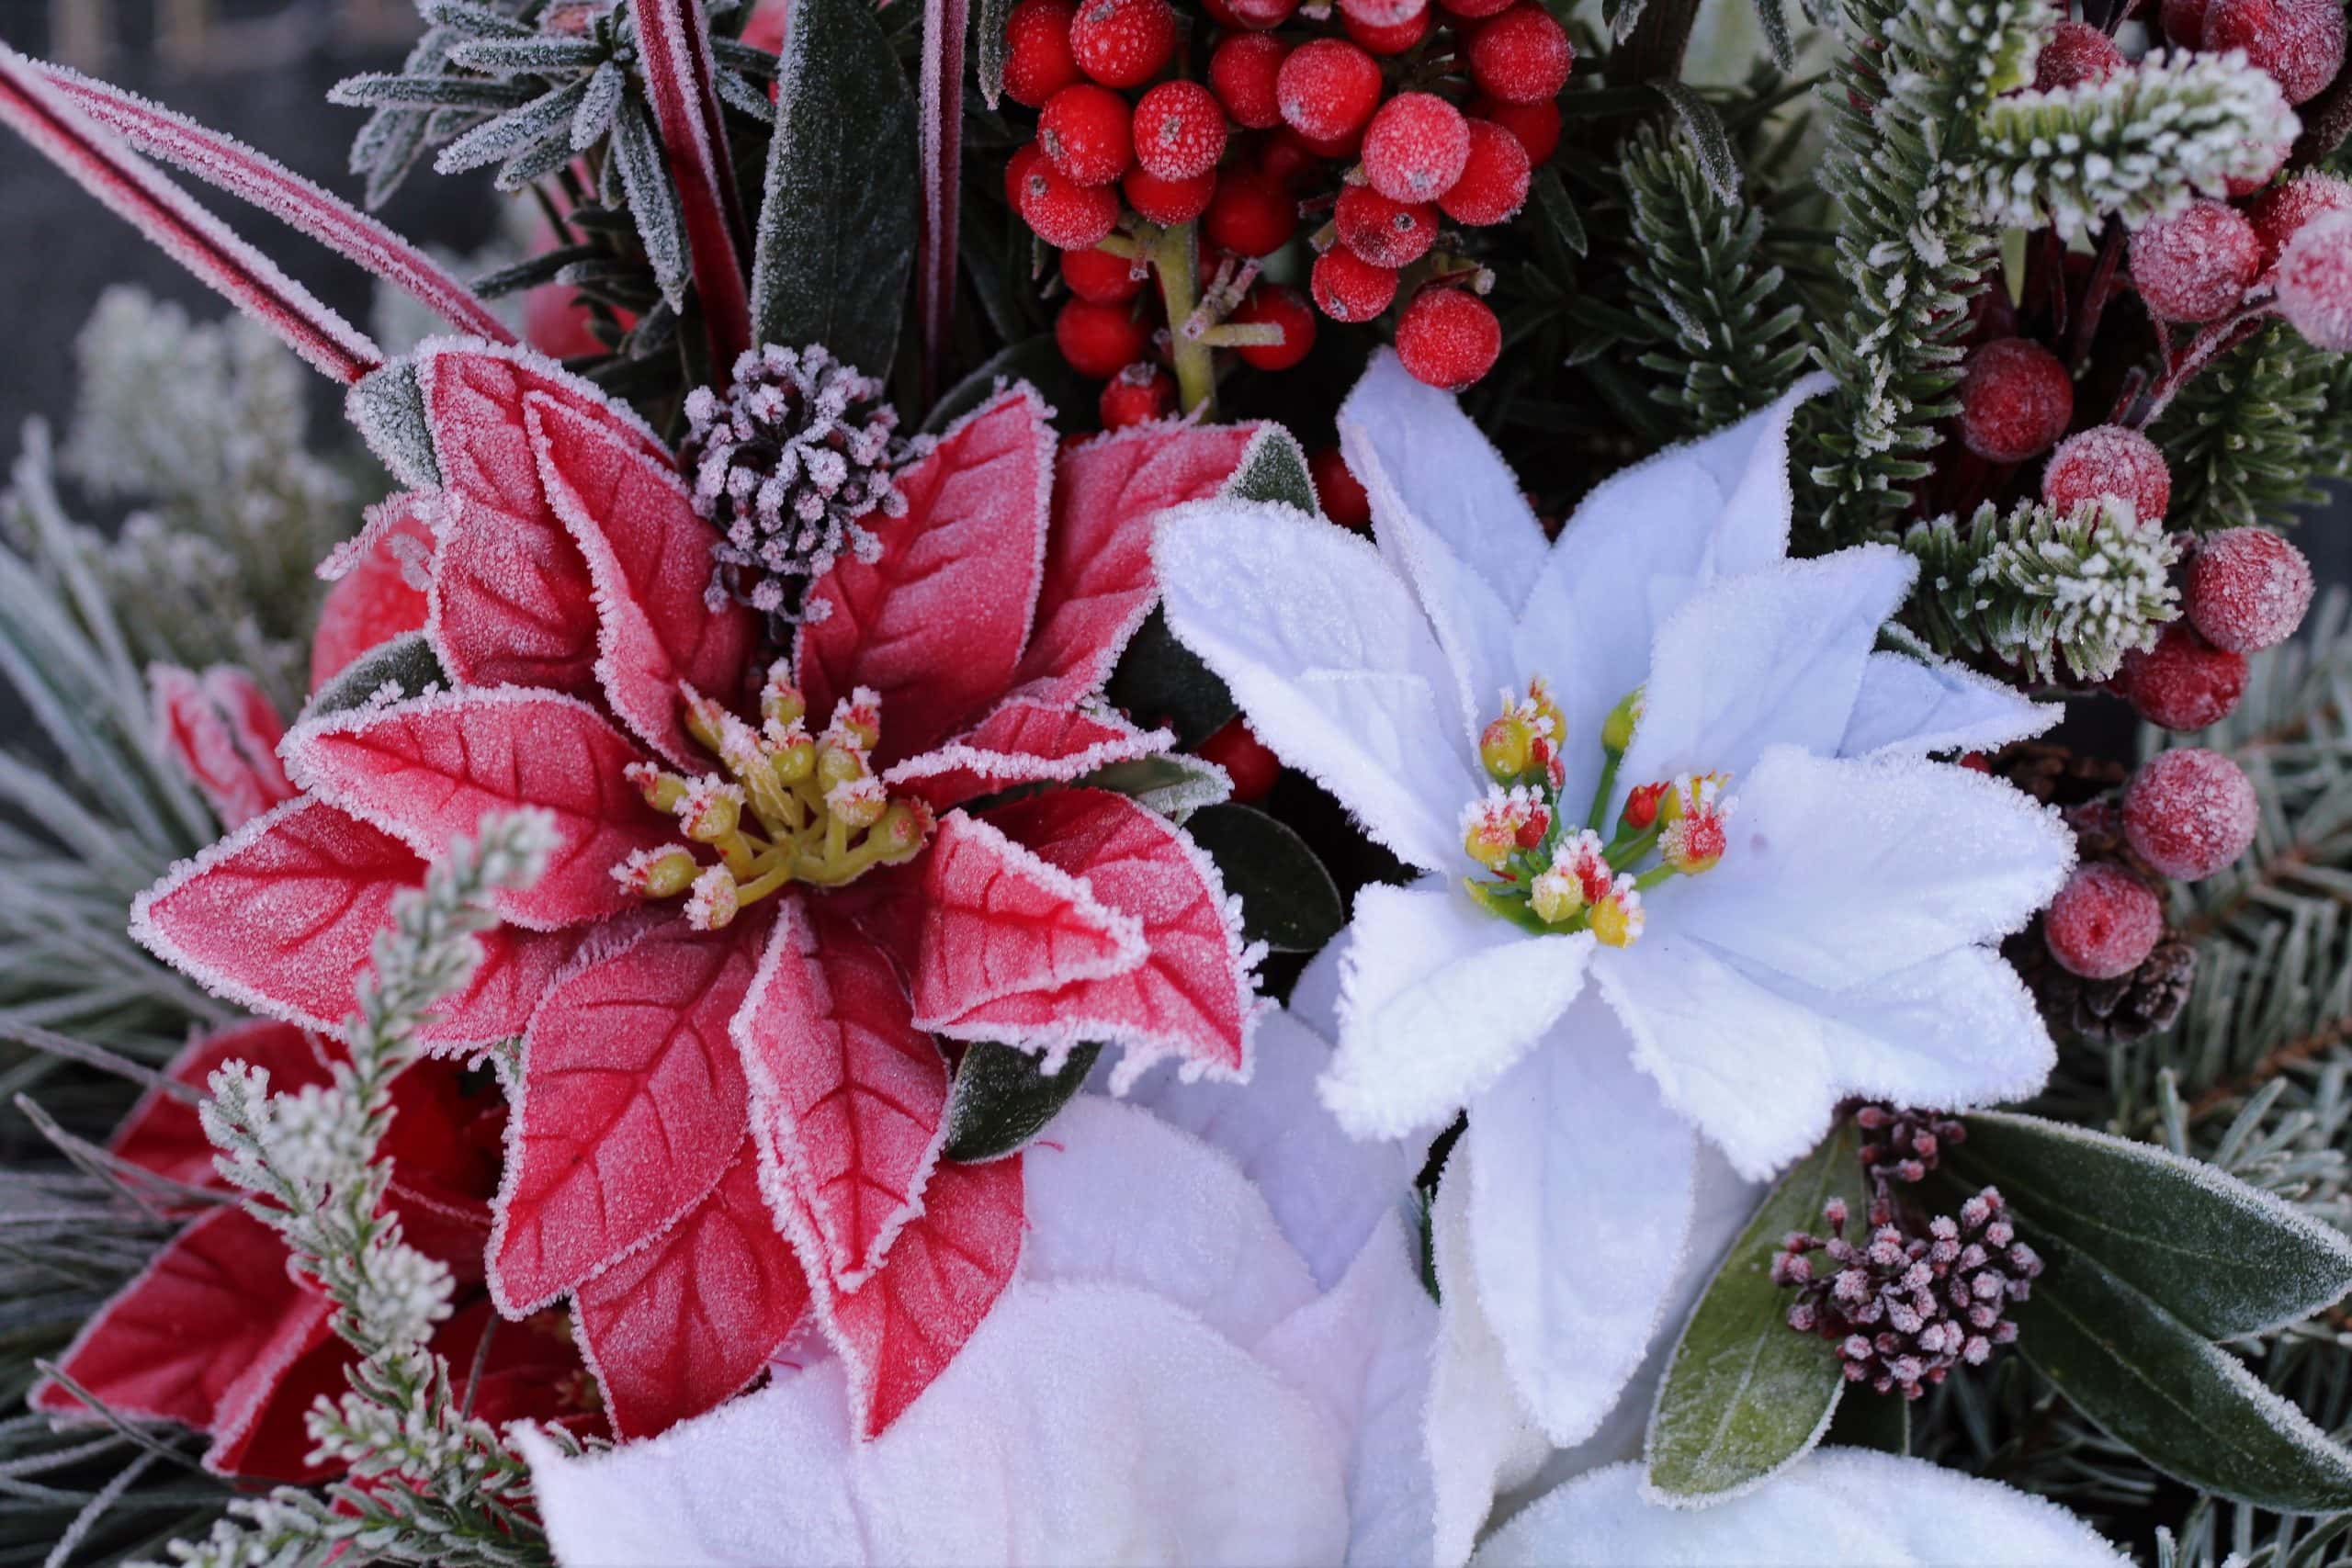 outdoor holiday greenery pots with flowers and berries